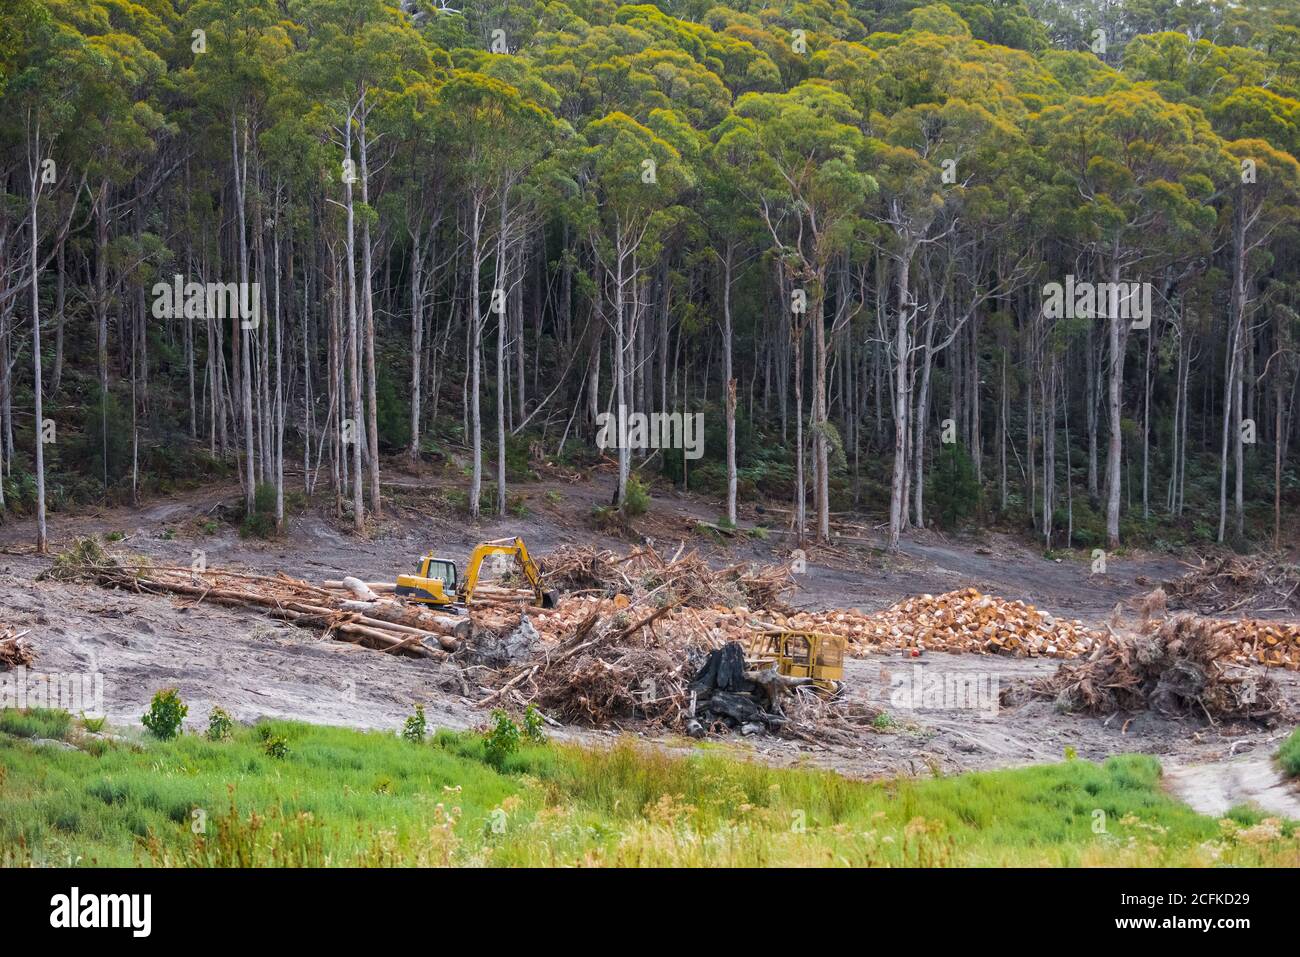 Deforestation north of Cygnet in the Huon Valley region of Tasmania, Australia, a state whose travel slogan used to be 'The Natural State.' Stock Photo